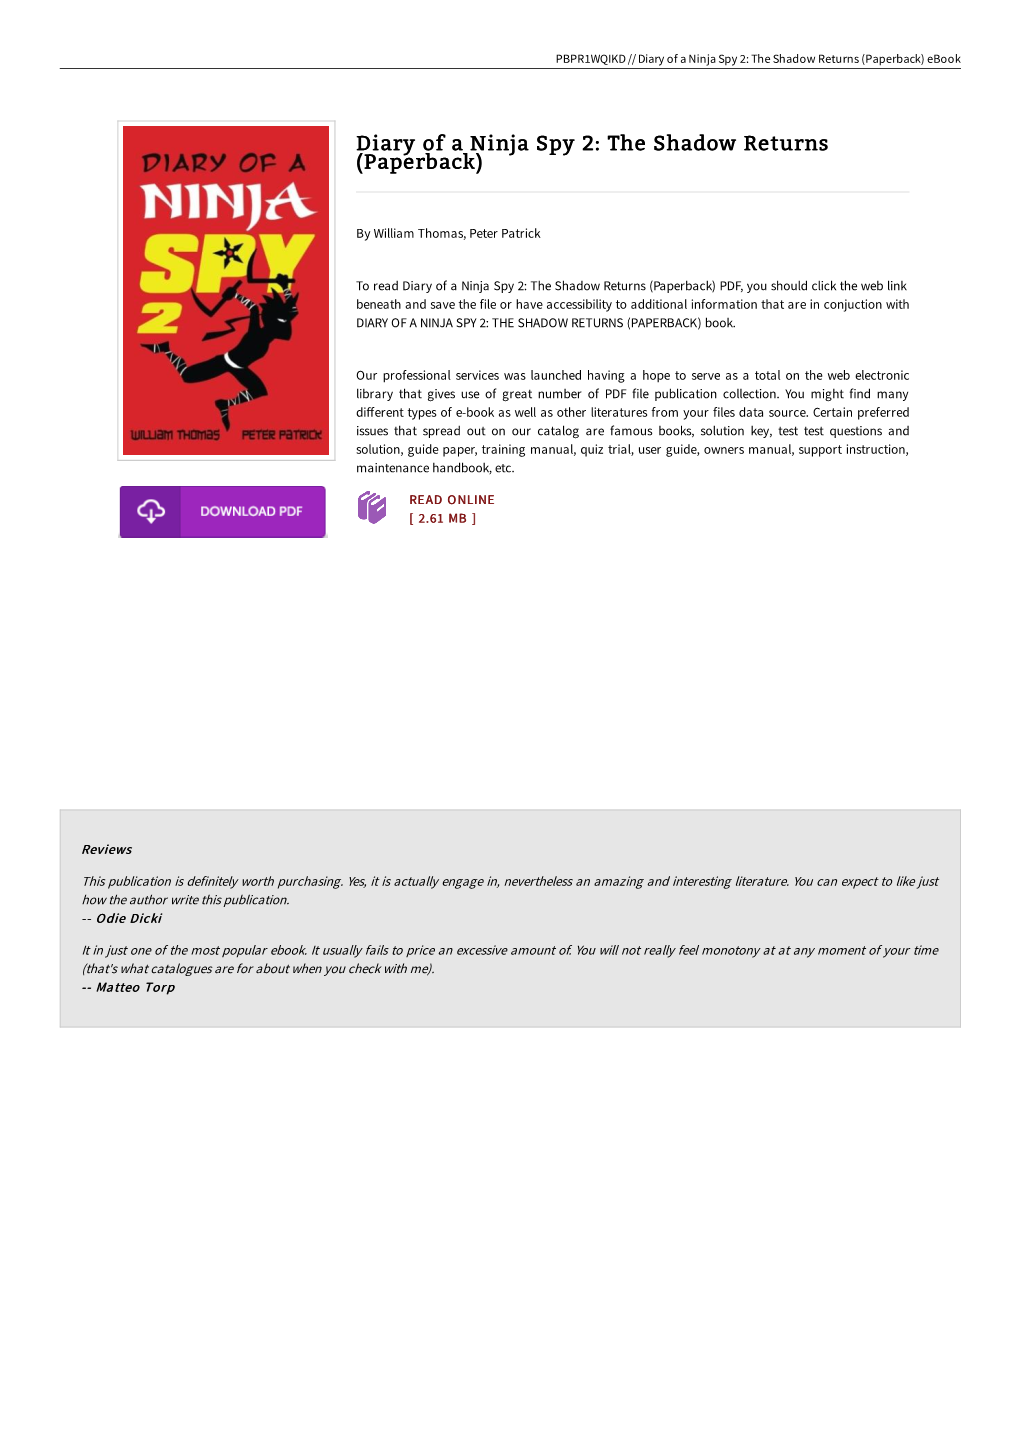 Read Book &gt; Diary of a Ninja Spy 2: the Shadow Returns (Paperback